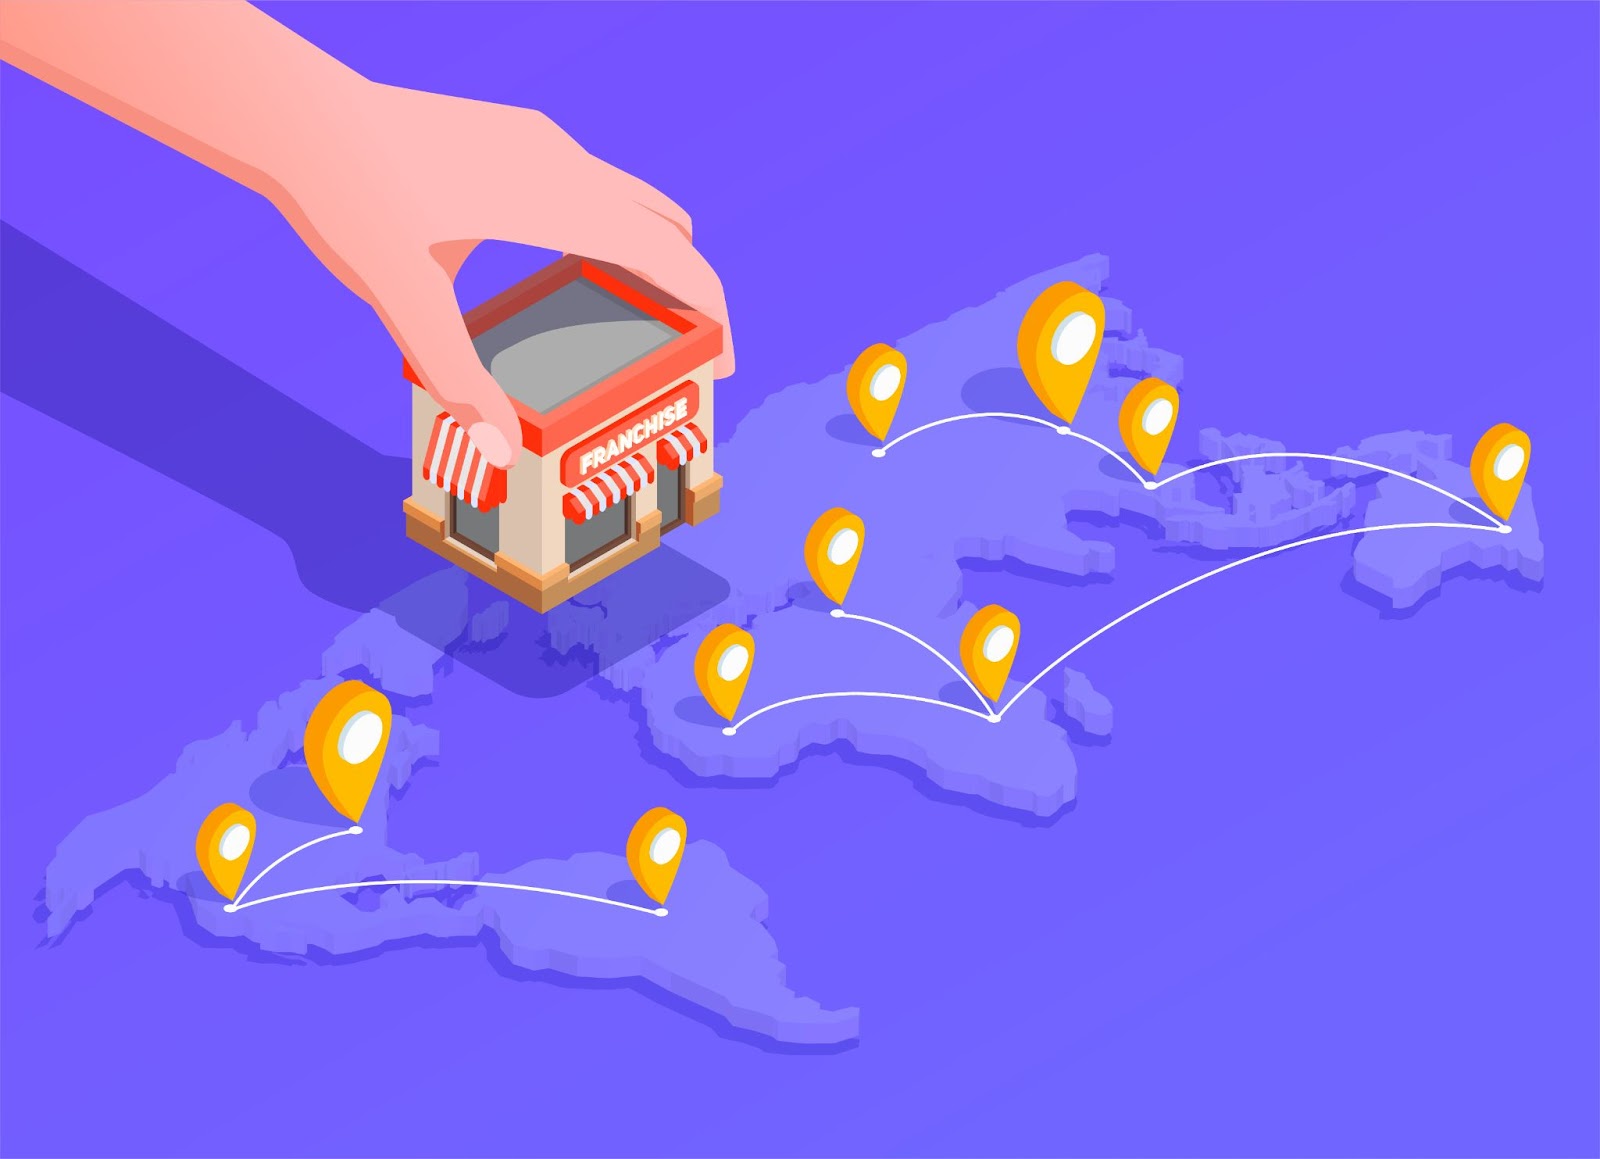 What Is Local SEO?